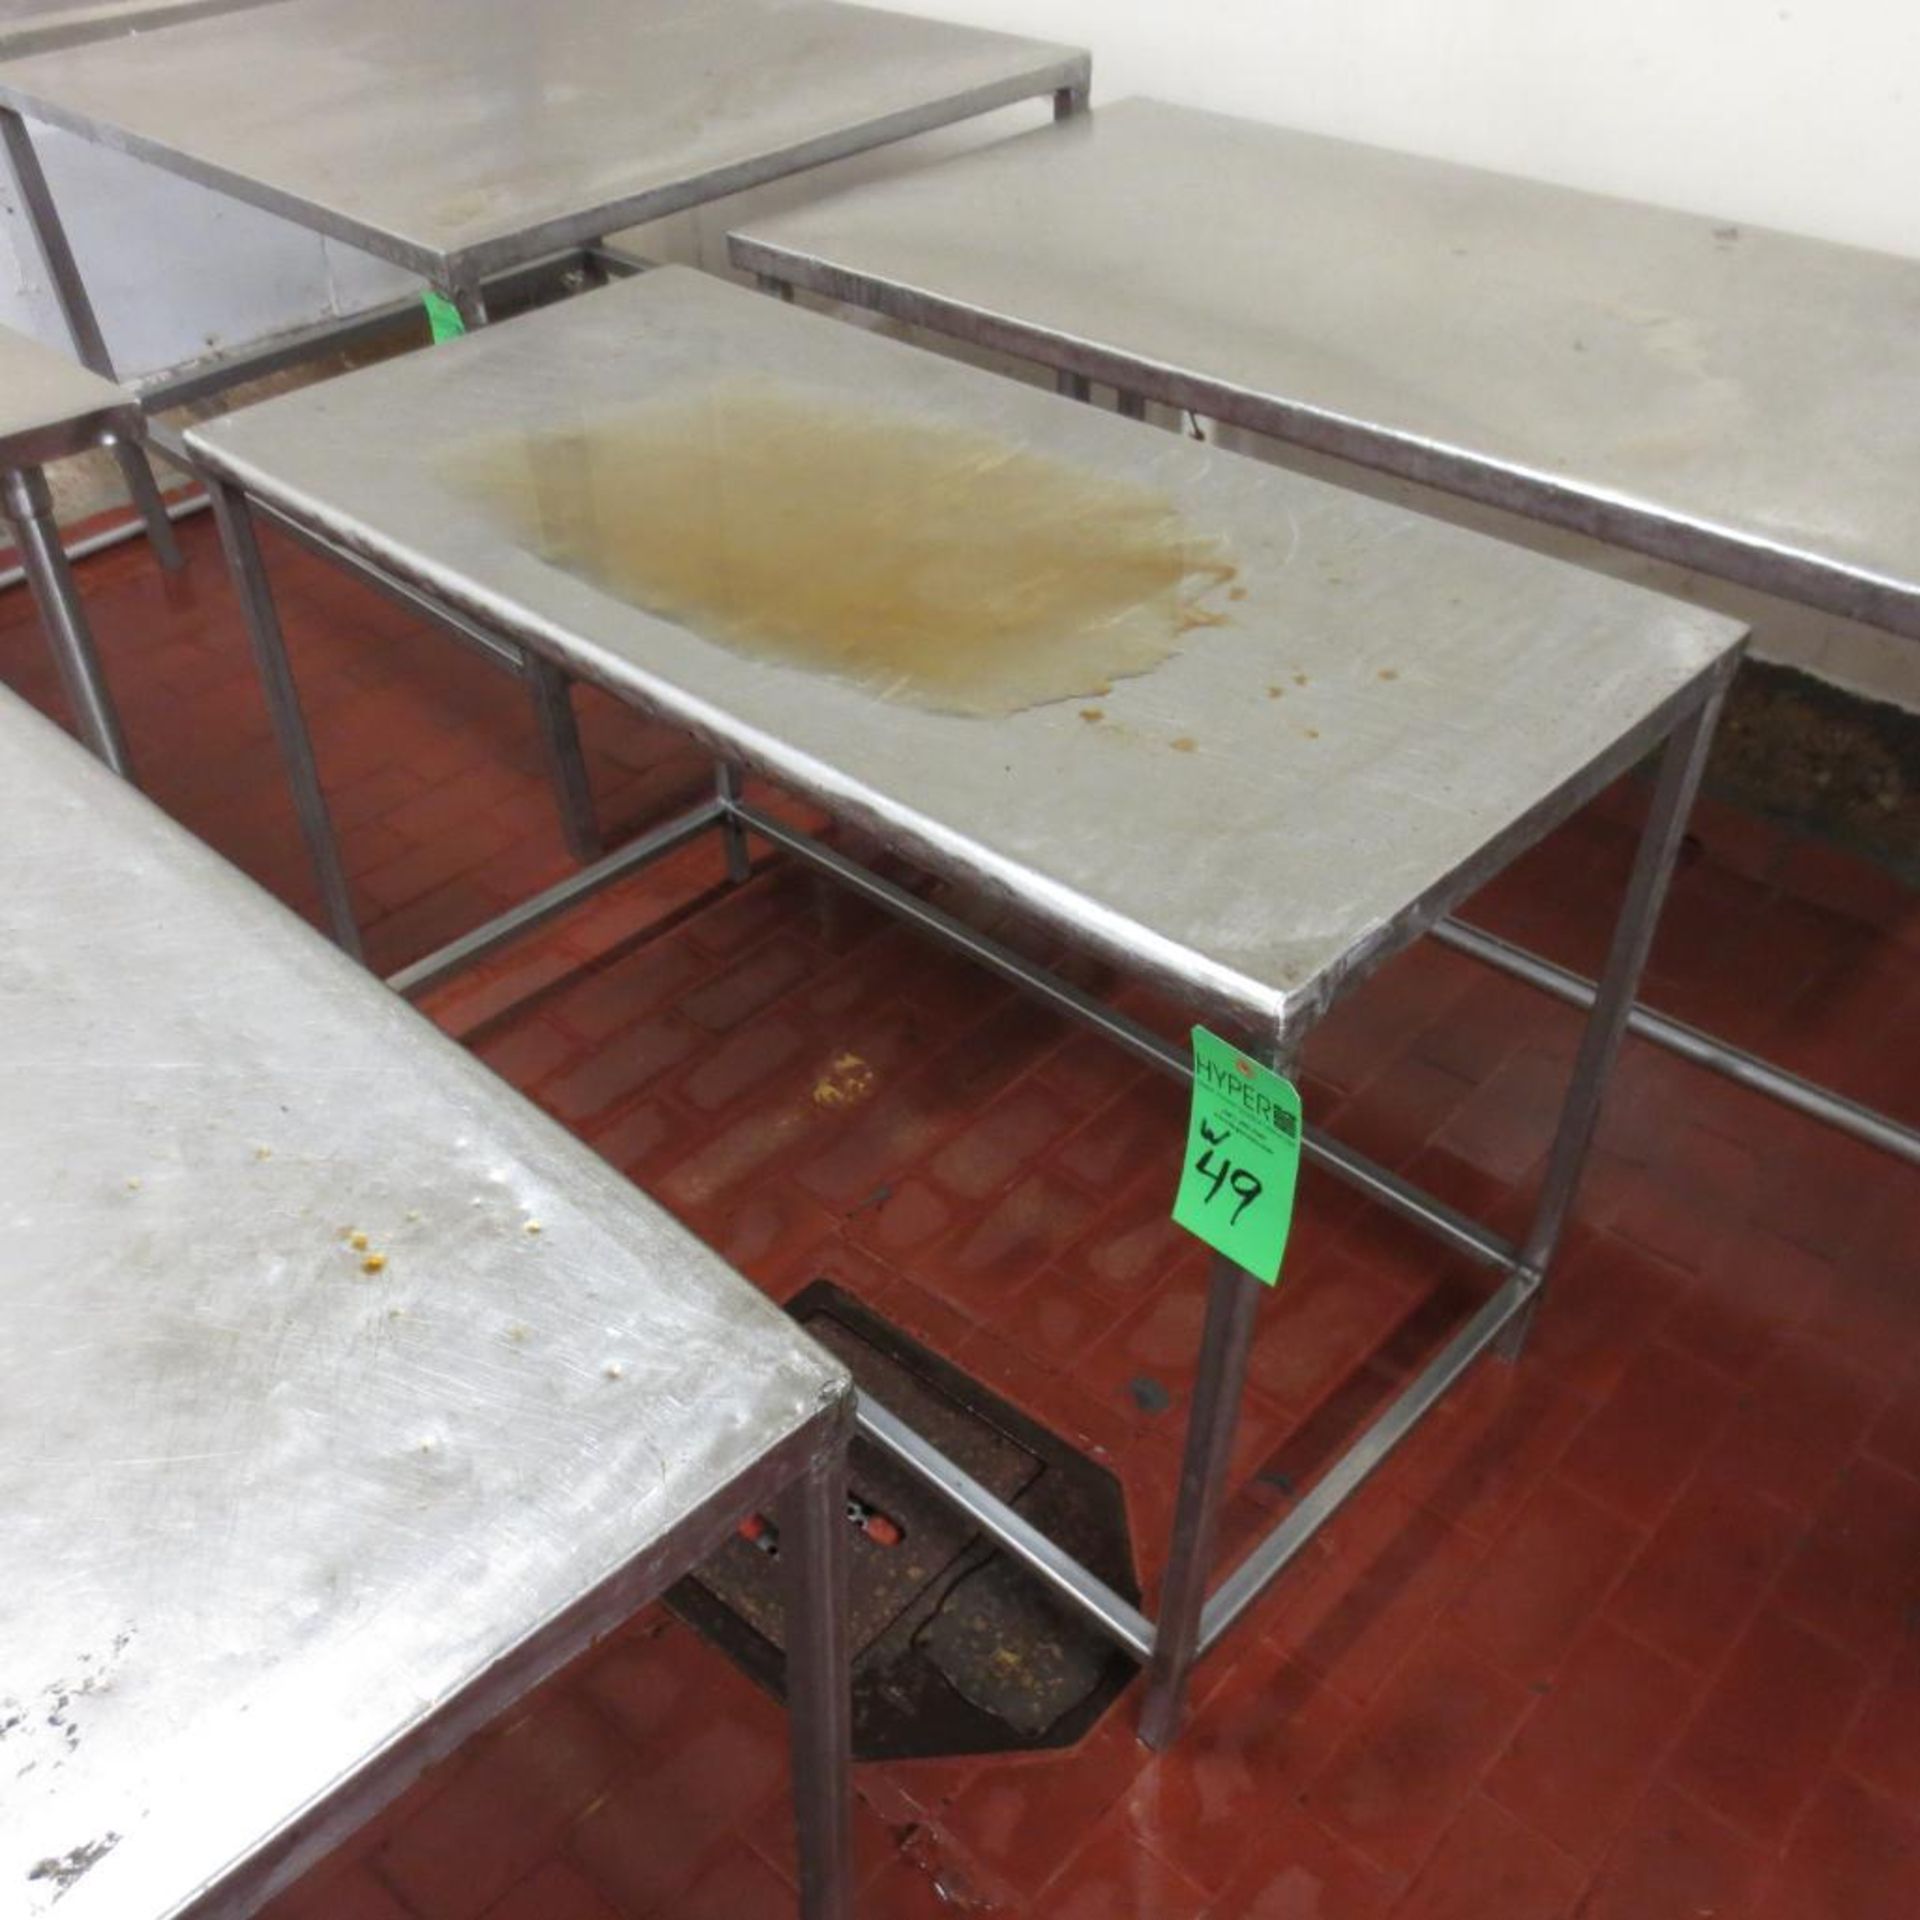 72" X 30" Stainless Table and (2) 48" X 24" Stainless Table - Image 3 of 4